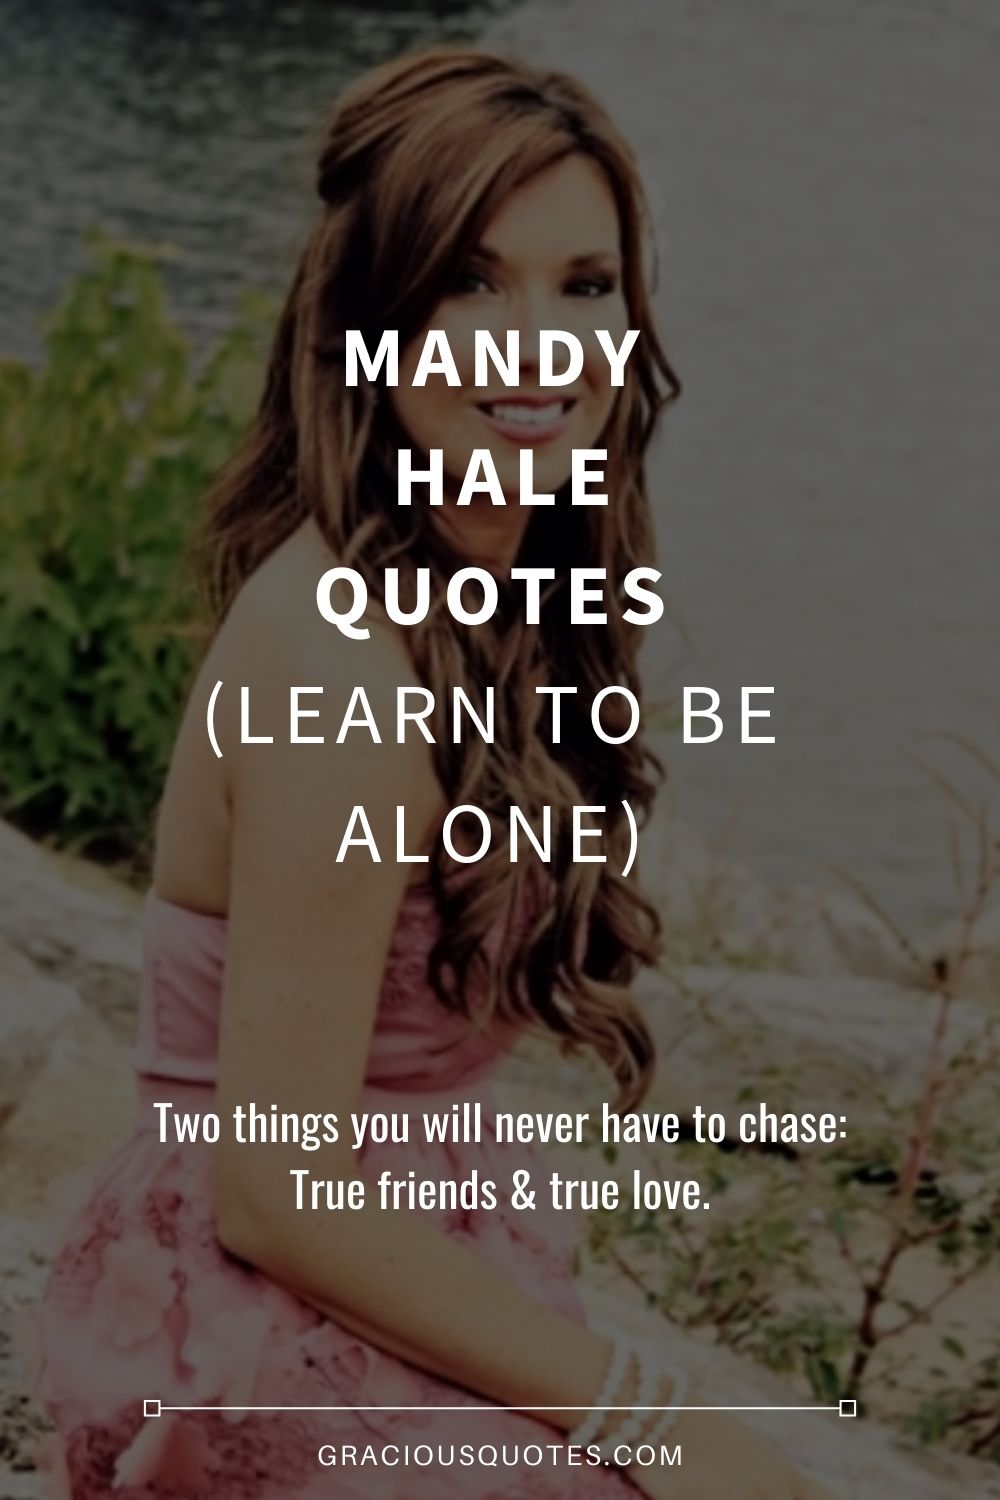 Mandy Hale Quotes (LEARN TO BE ALONE) - Gracious Quotes